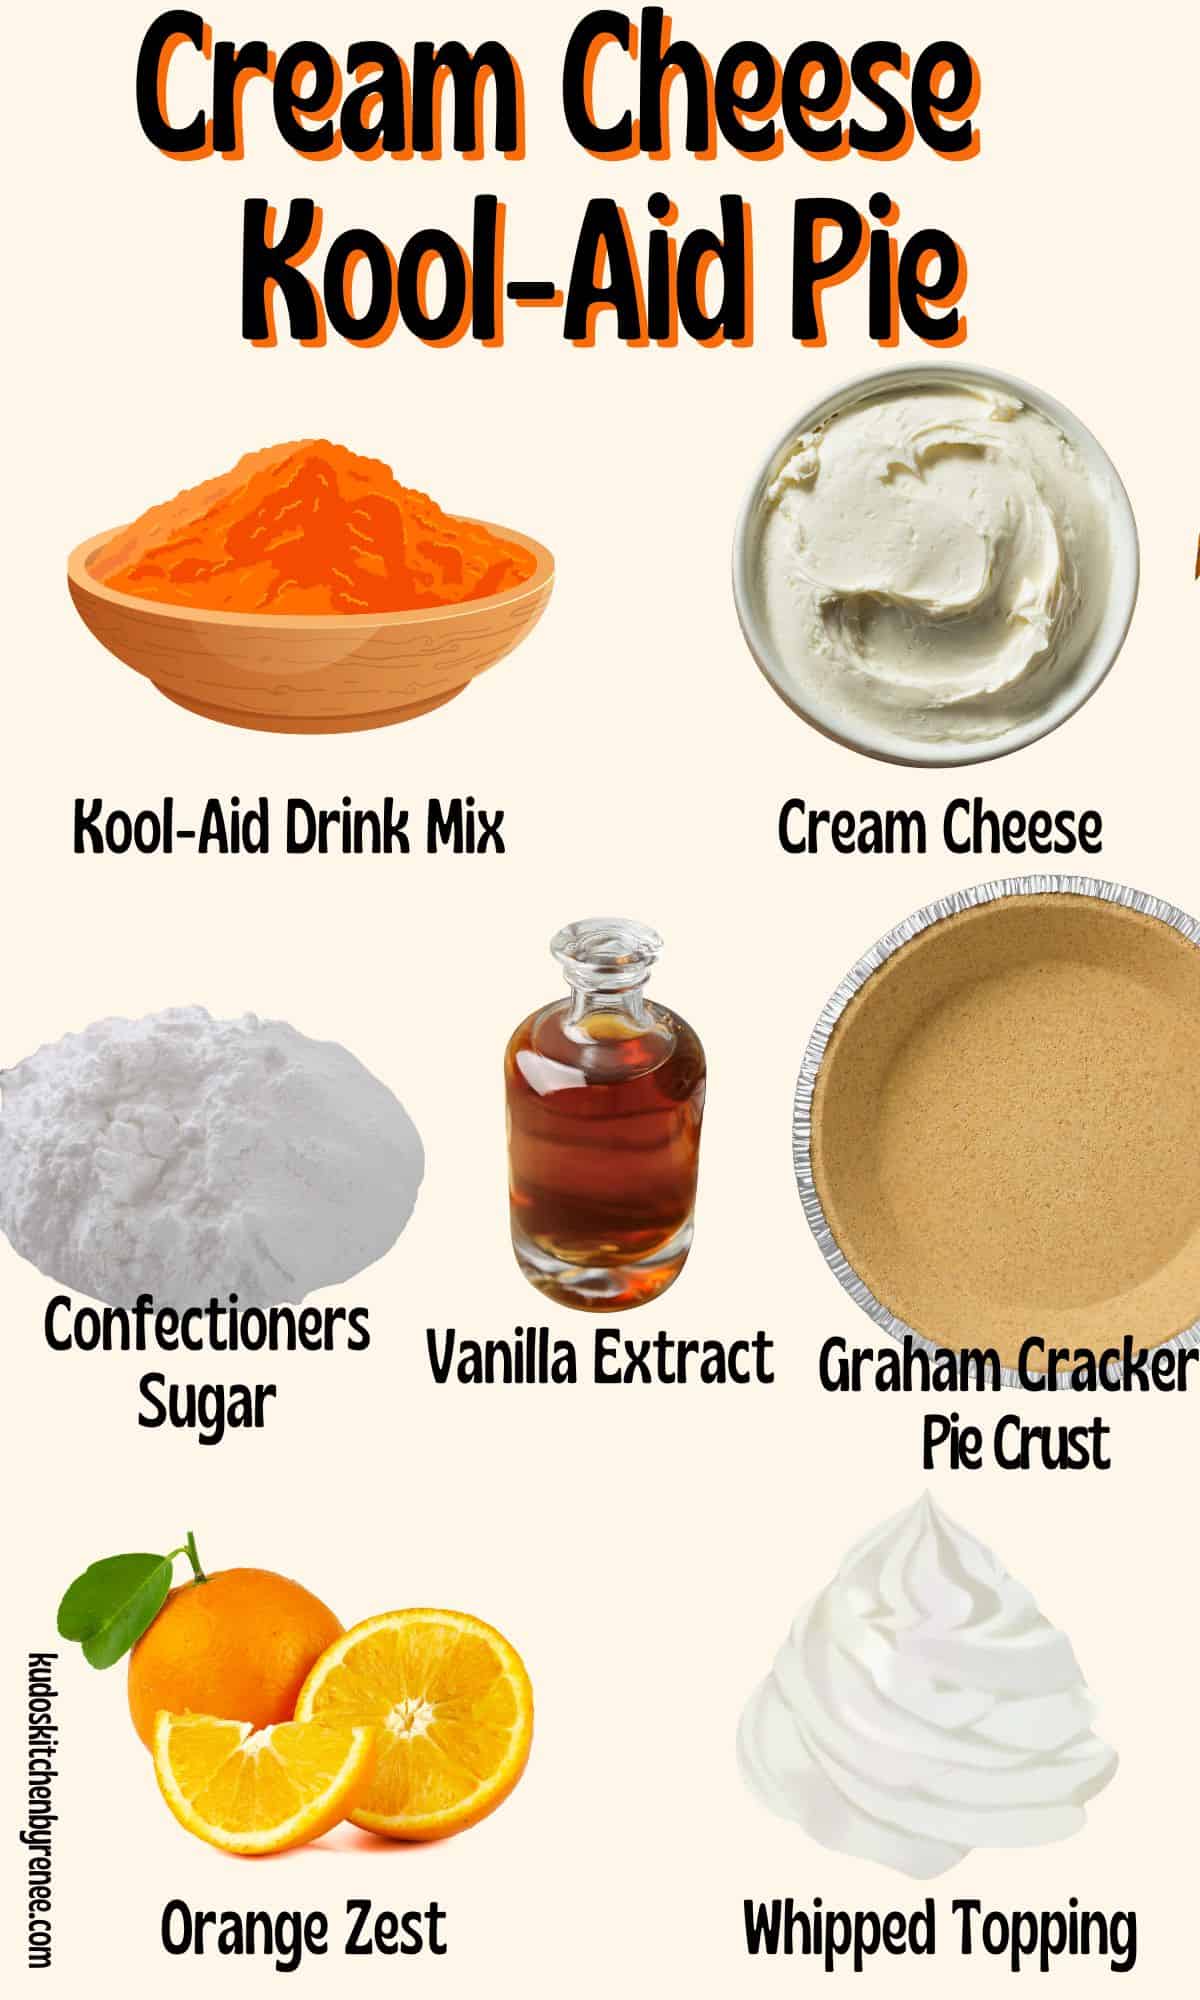 The full ingredient list for making Cream Cheese Kool-Aid Pie with visual images of all the ingredients.